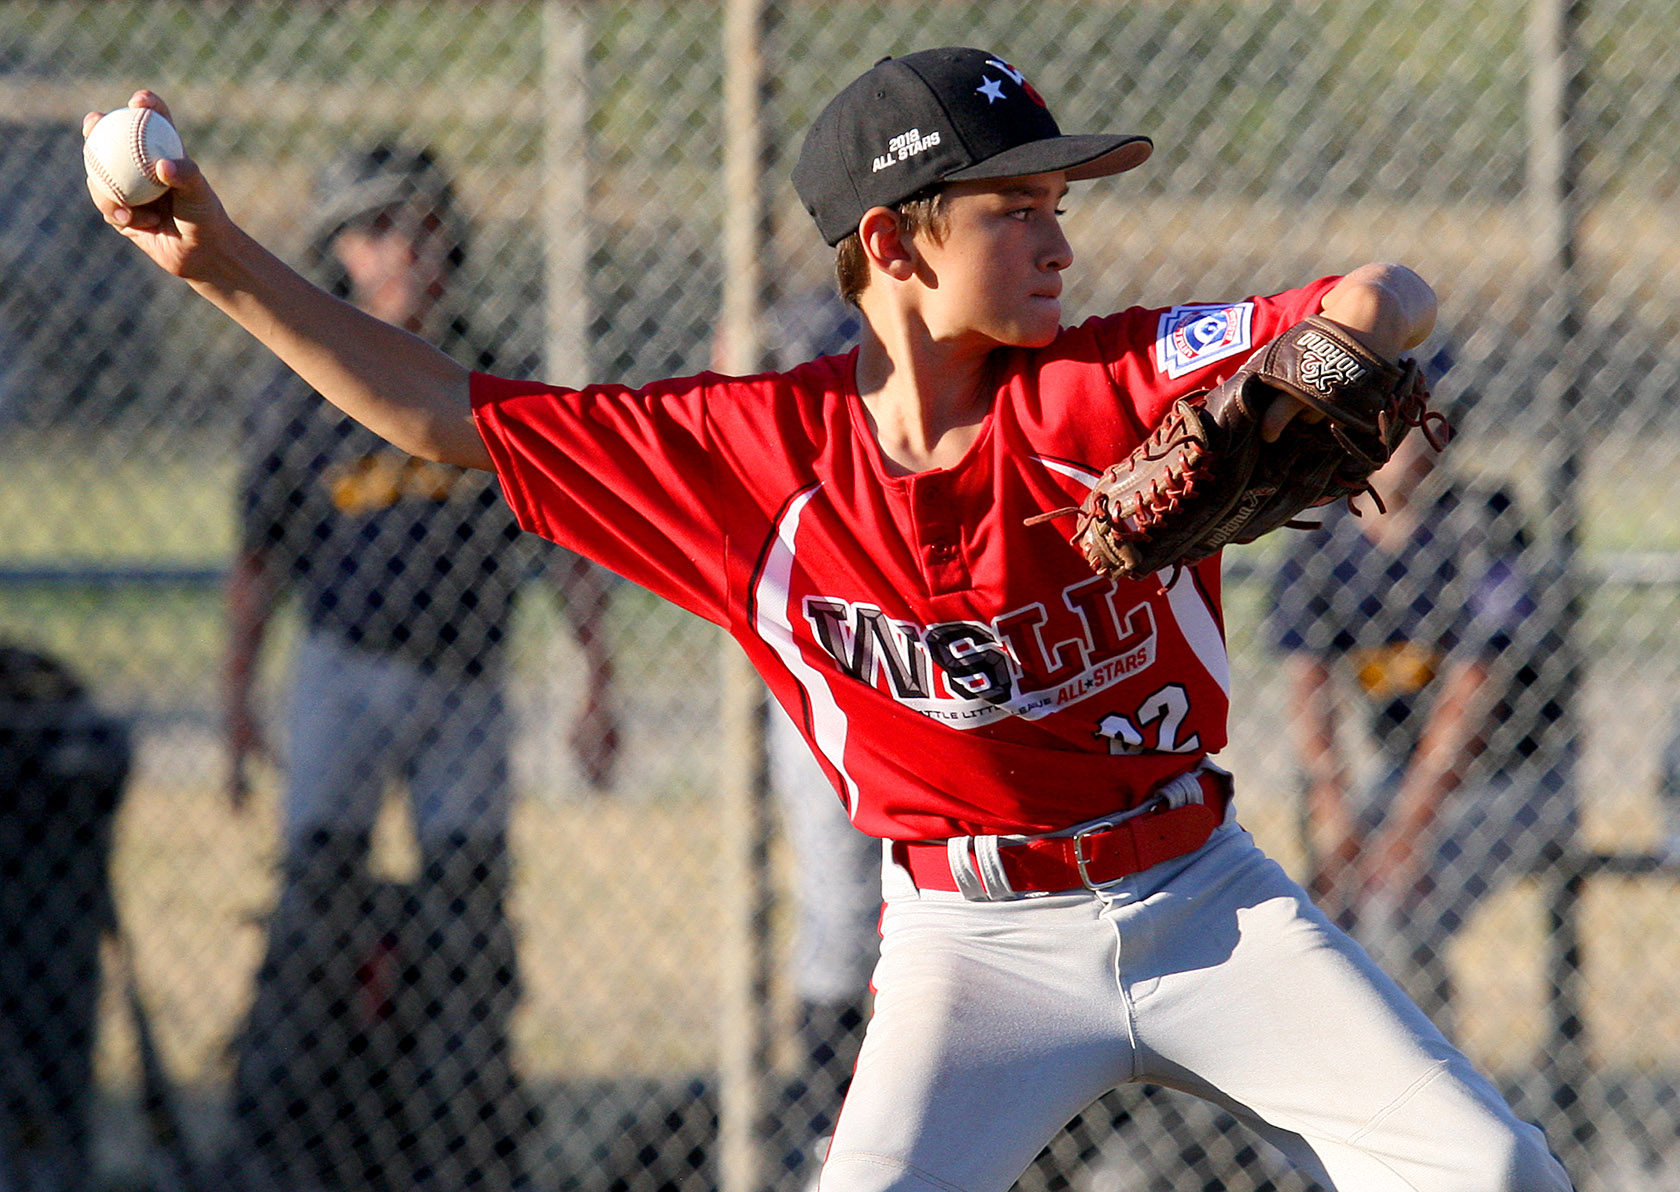 Starting pitcher Hudson Harding of West Seattle delivers his pitch to home plate.